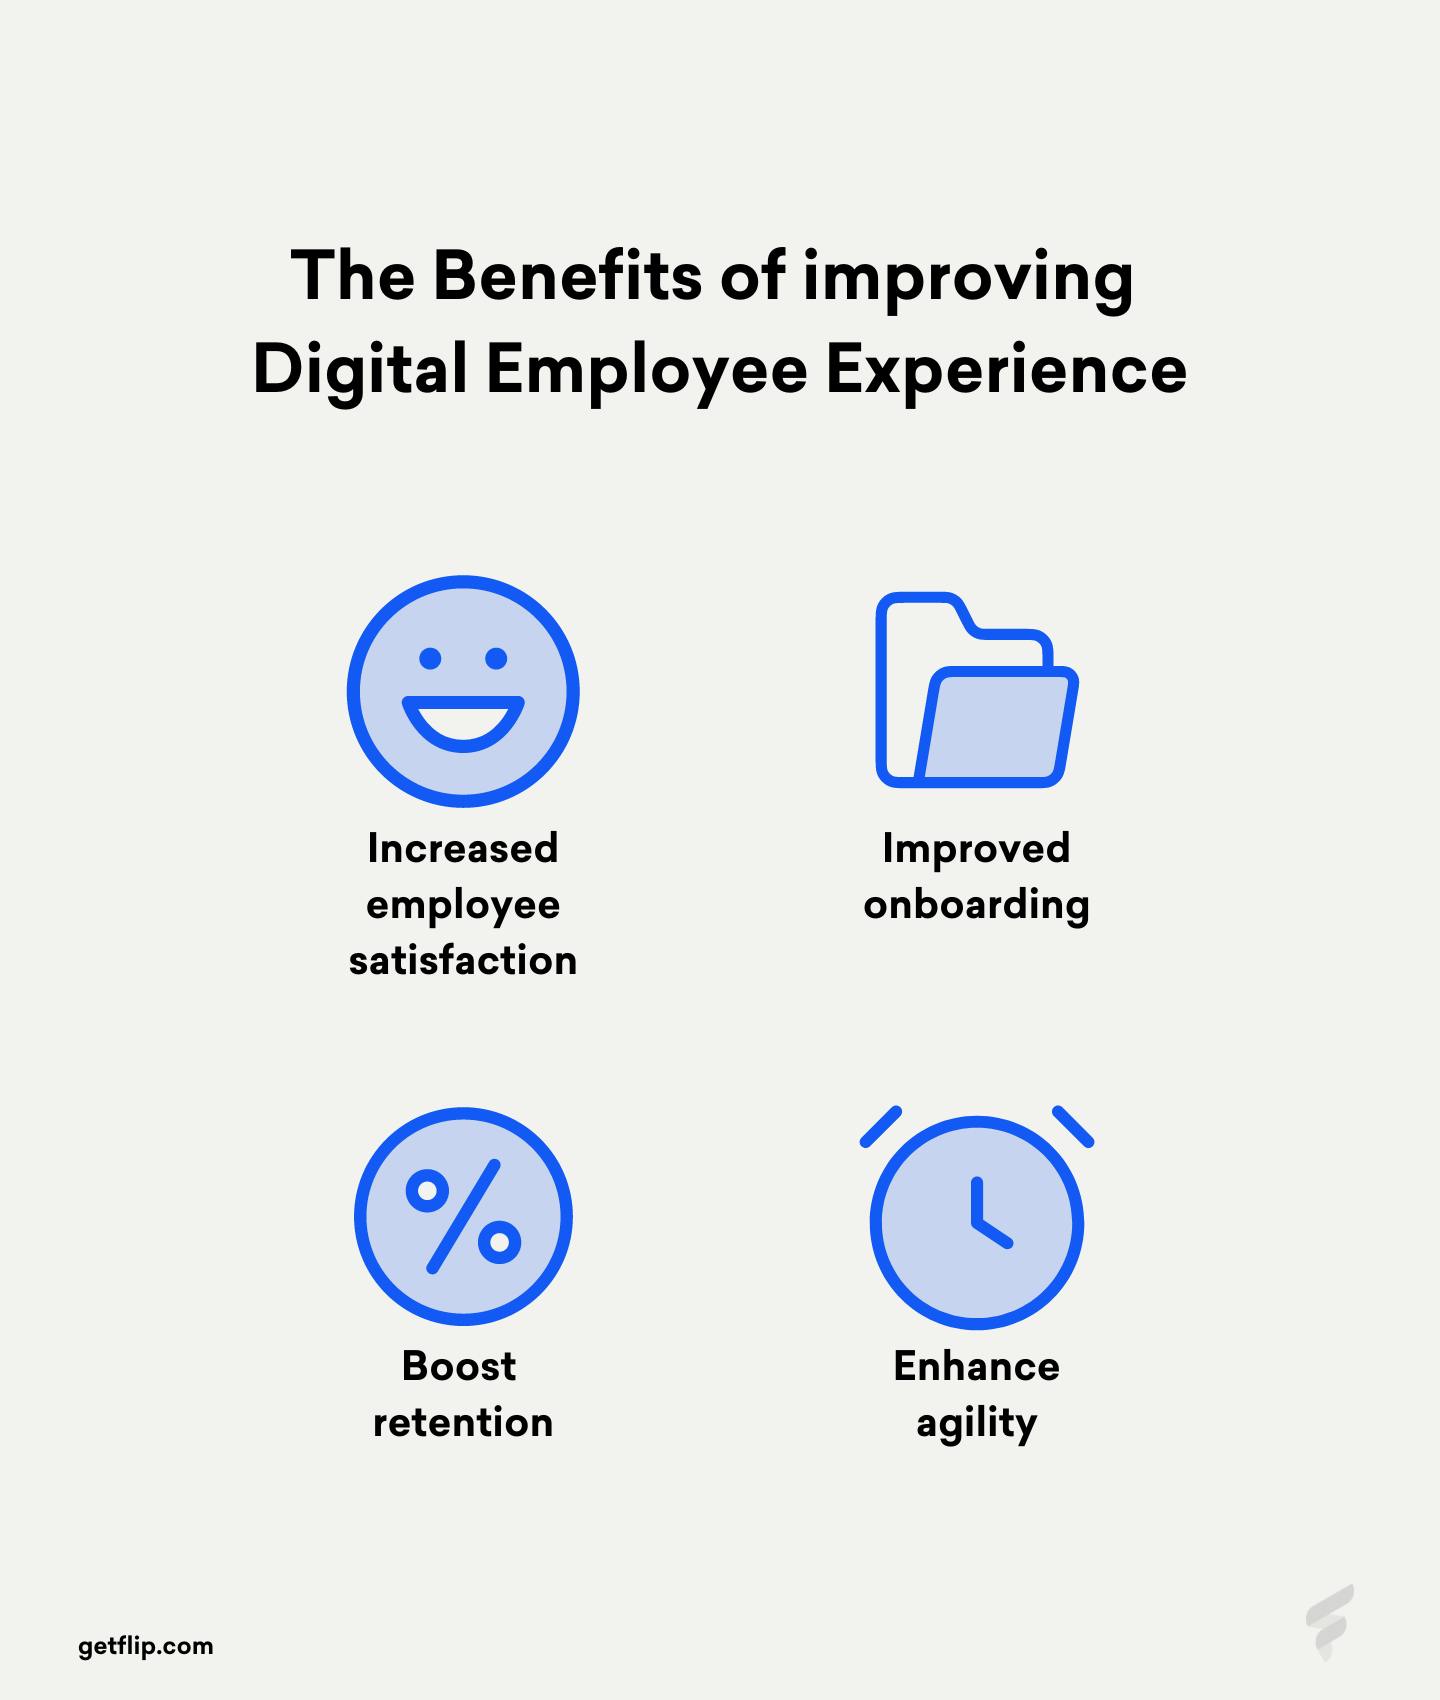 A Visual displaying the benefits of improving digital employee experience